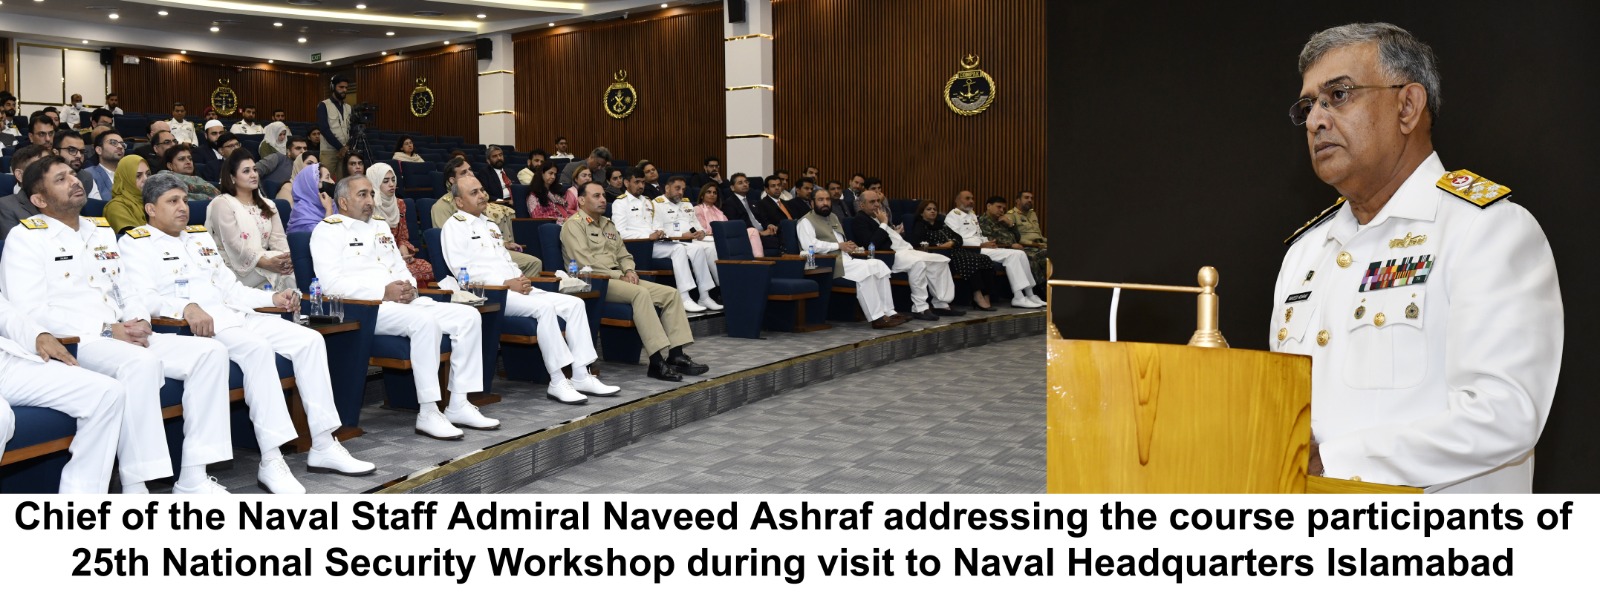 MARITIME SECTOR HOLDS ENORMOUS POTENTIAL FOR PAKISTAN’S ECONOMY: NAVAL CHIEF